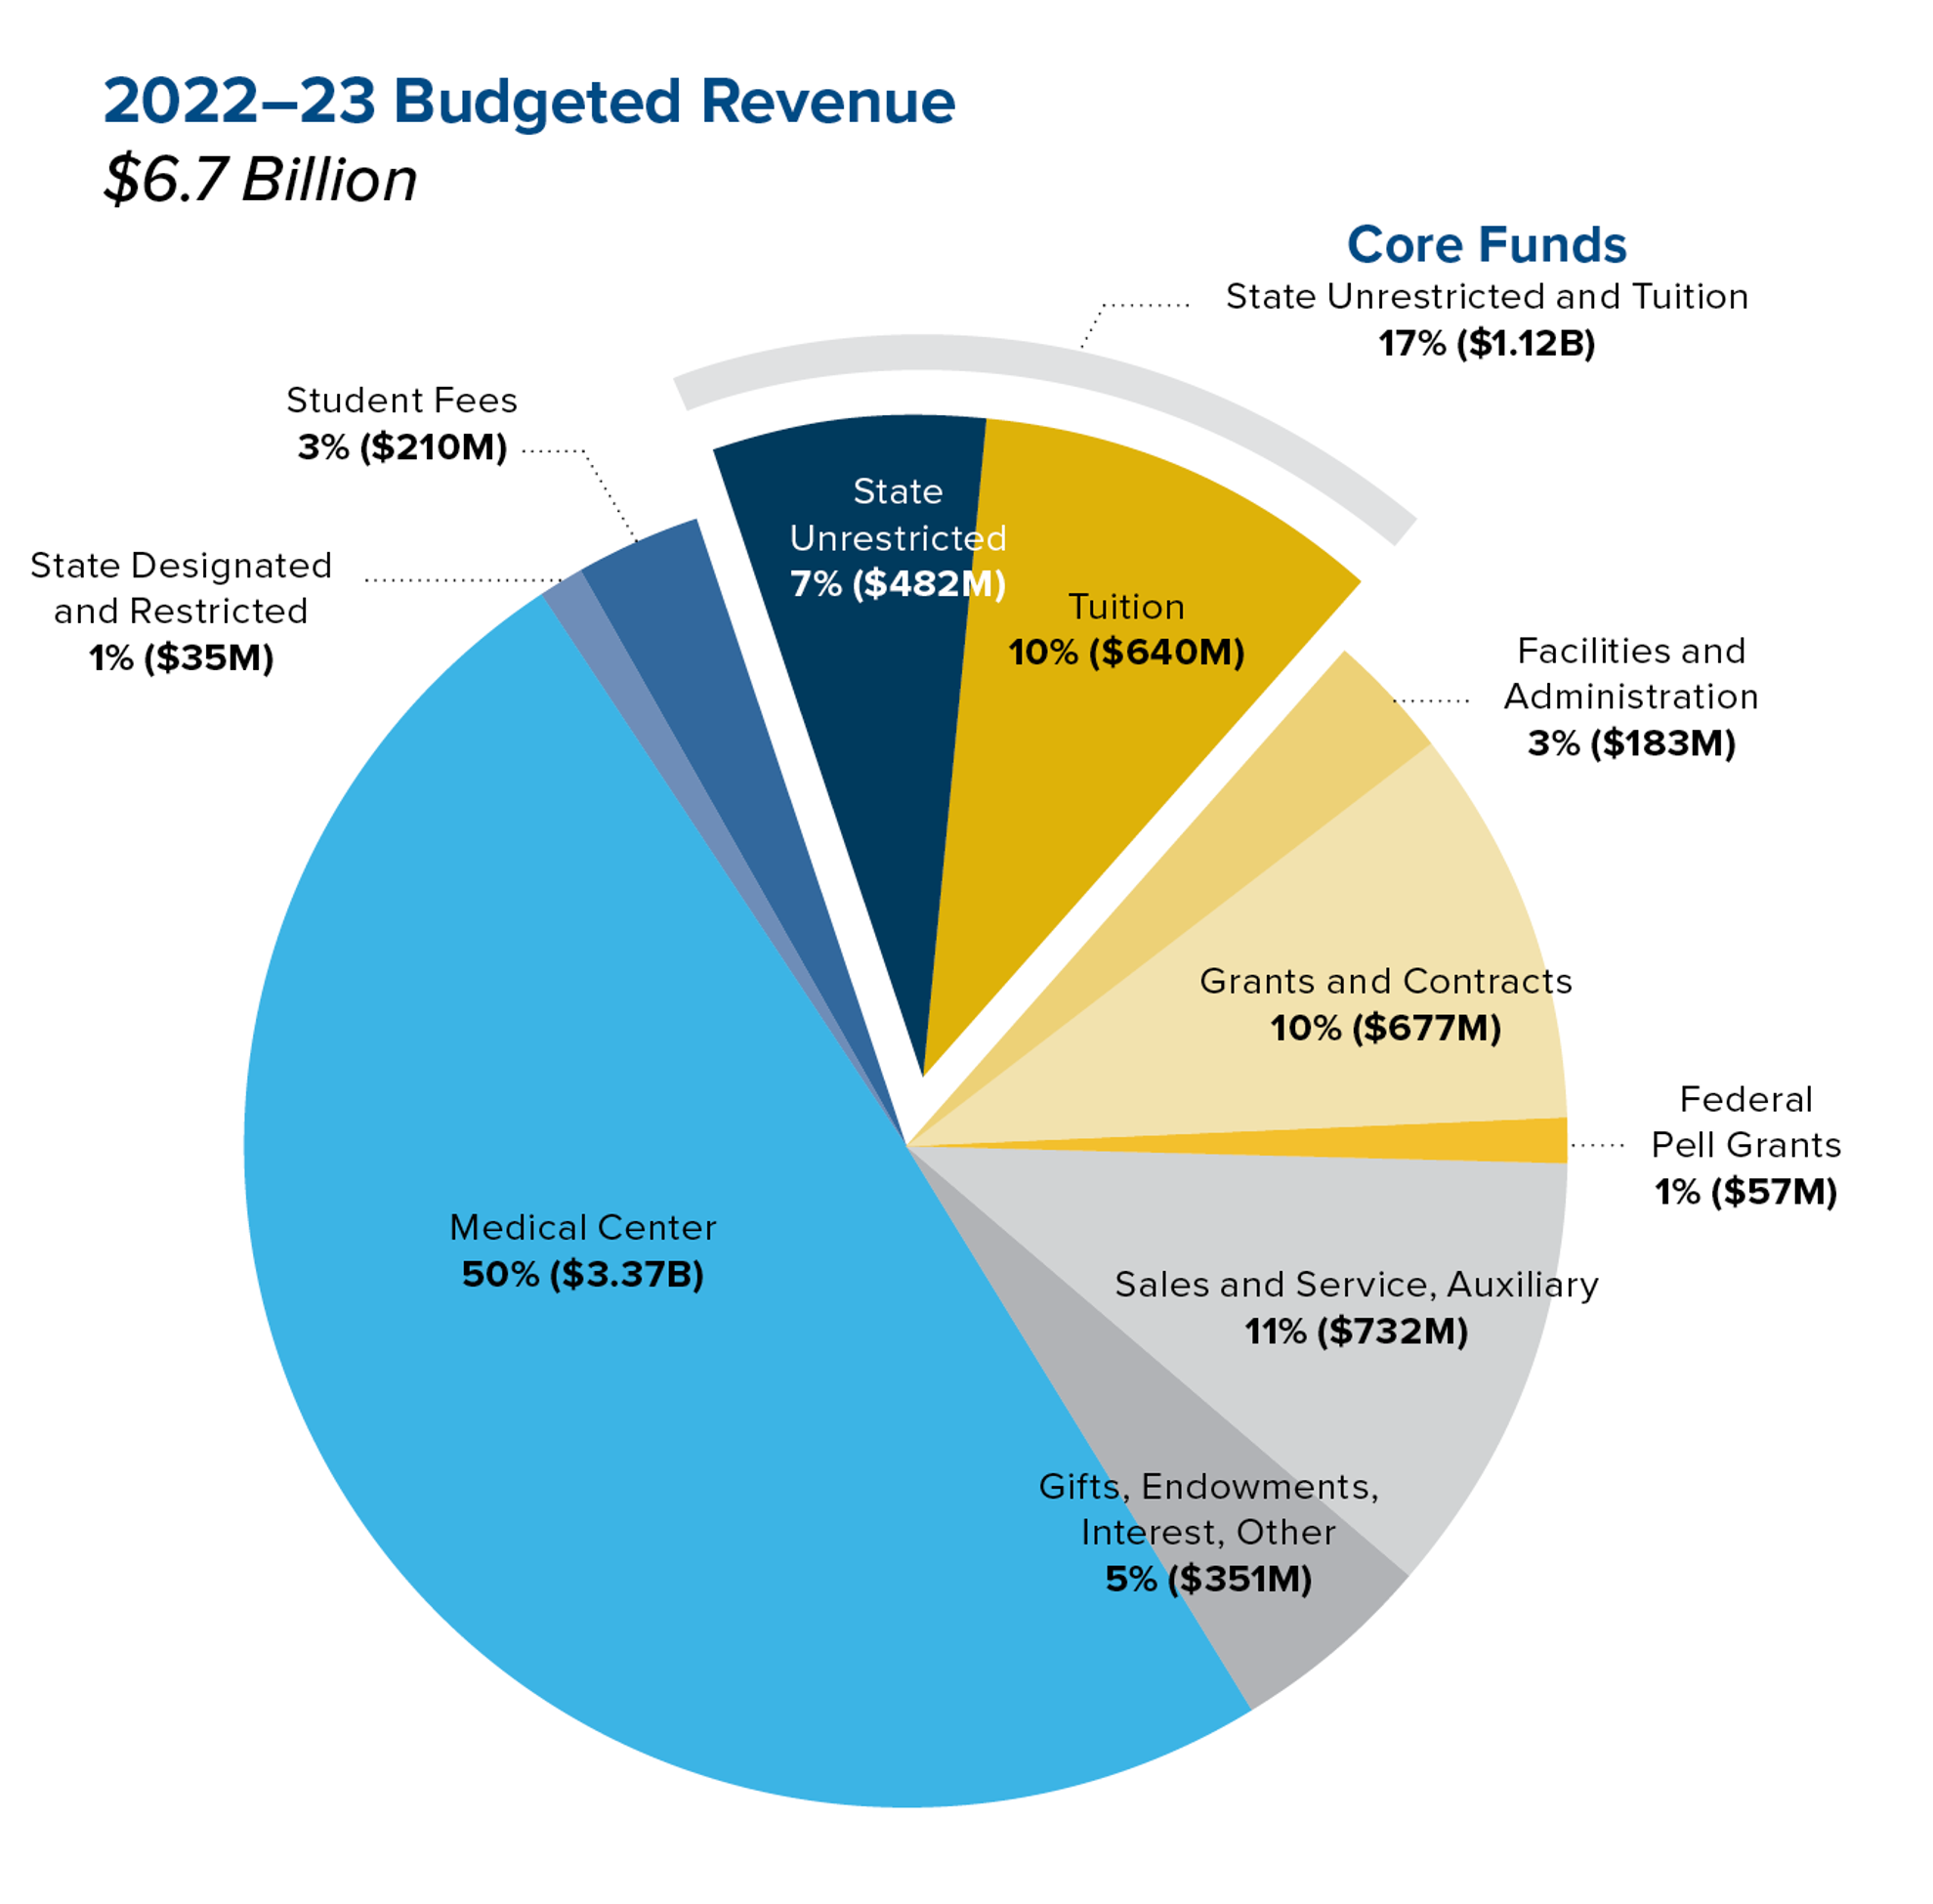 Chart shows 2022-23 budgeted revenue, $6.7 billion. Core funds make up 17%, facilities and administration 3%, grants and contracts 10%, federal pell grants 1%, sales and service, auxiliary, 11%, gifts endowments interest other 5%, medical center 50%, state designated and restricted 1%, and student fees 3%.